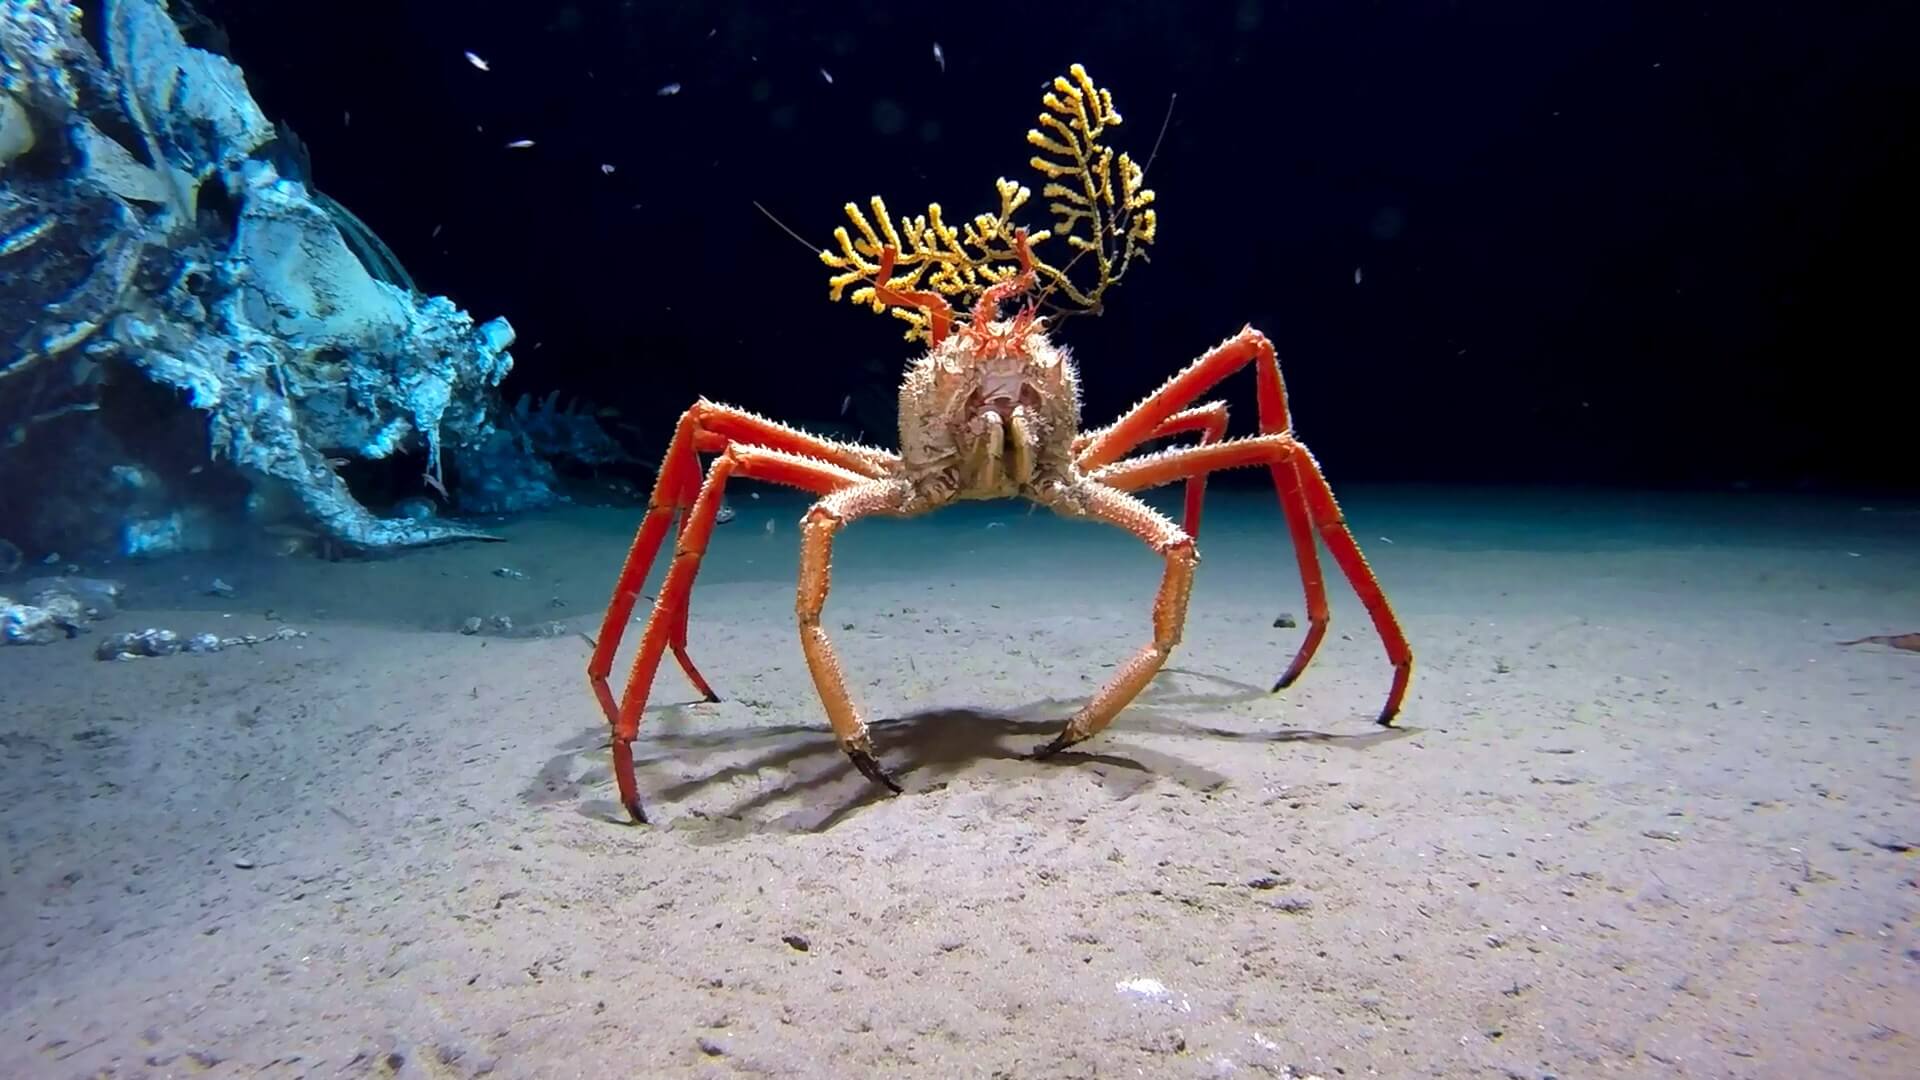 One Japanese Spider Crab got a bit lost one time